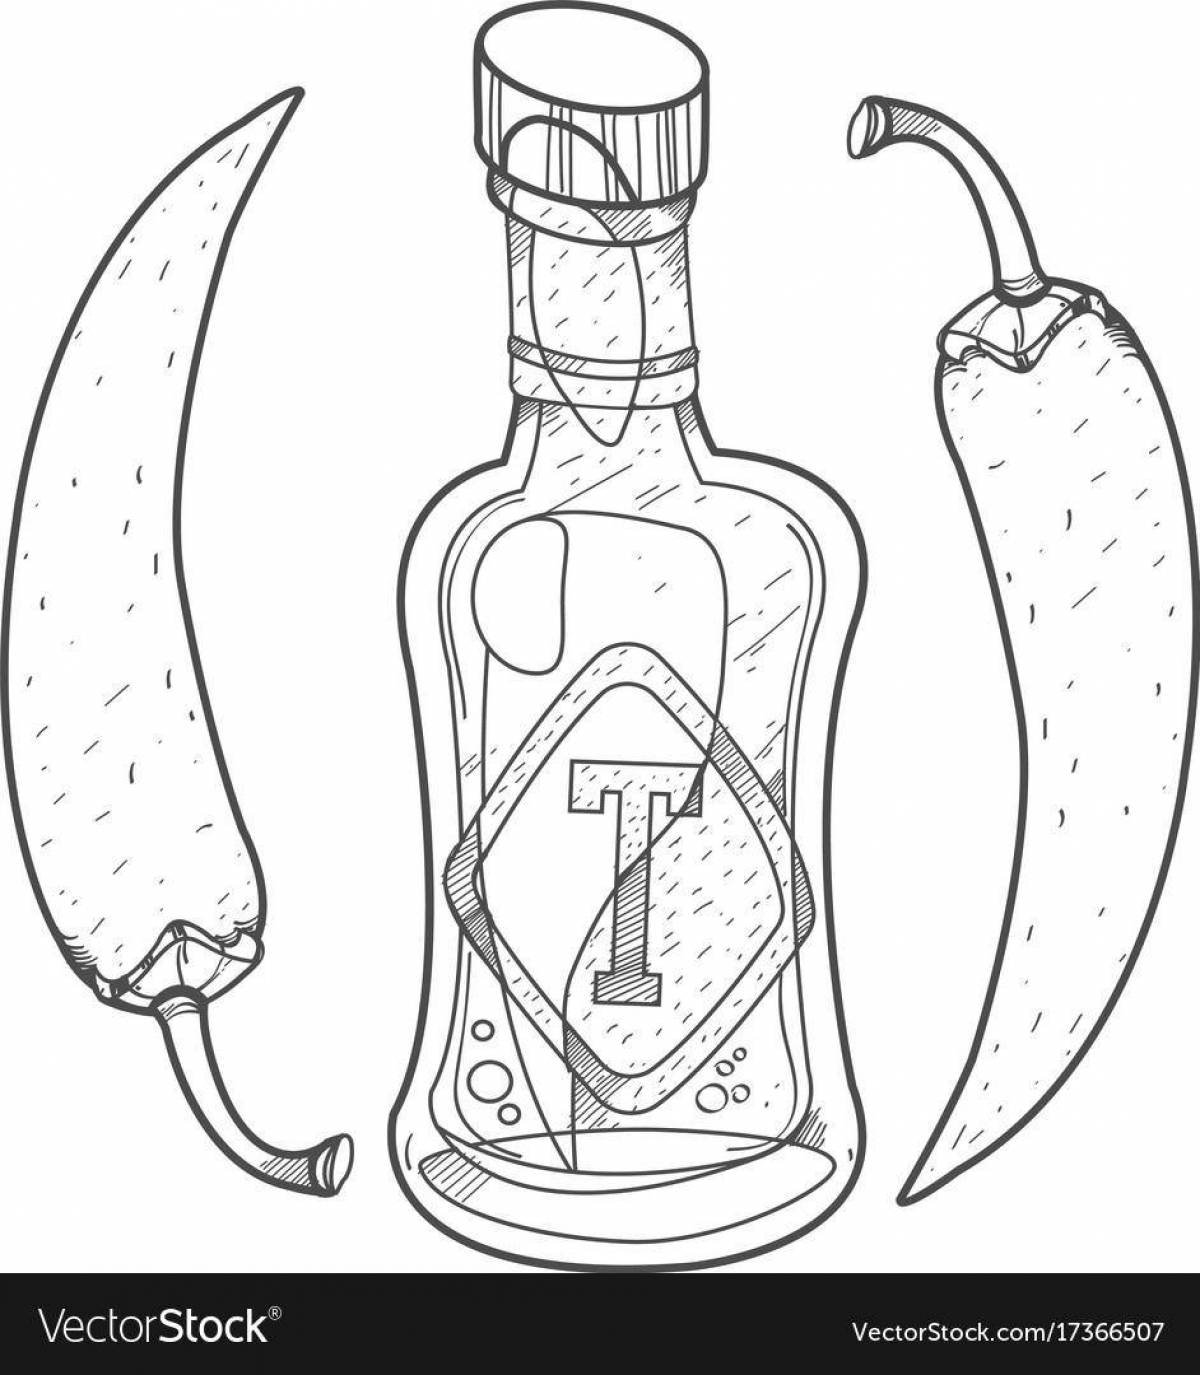 Edison bell pepper coloring page